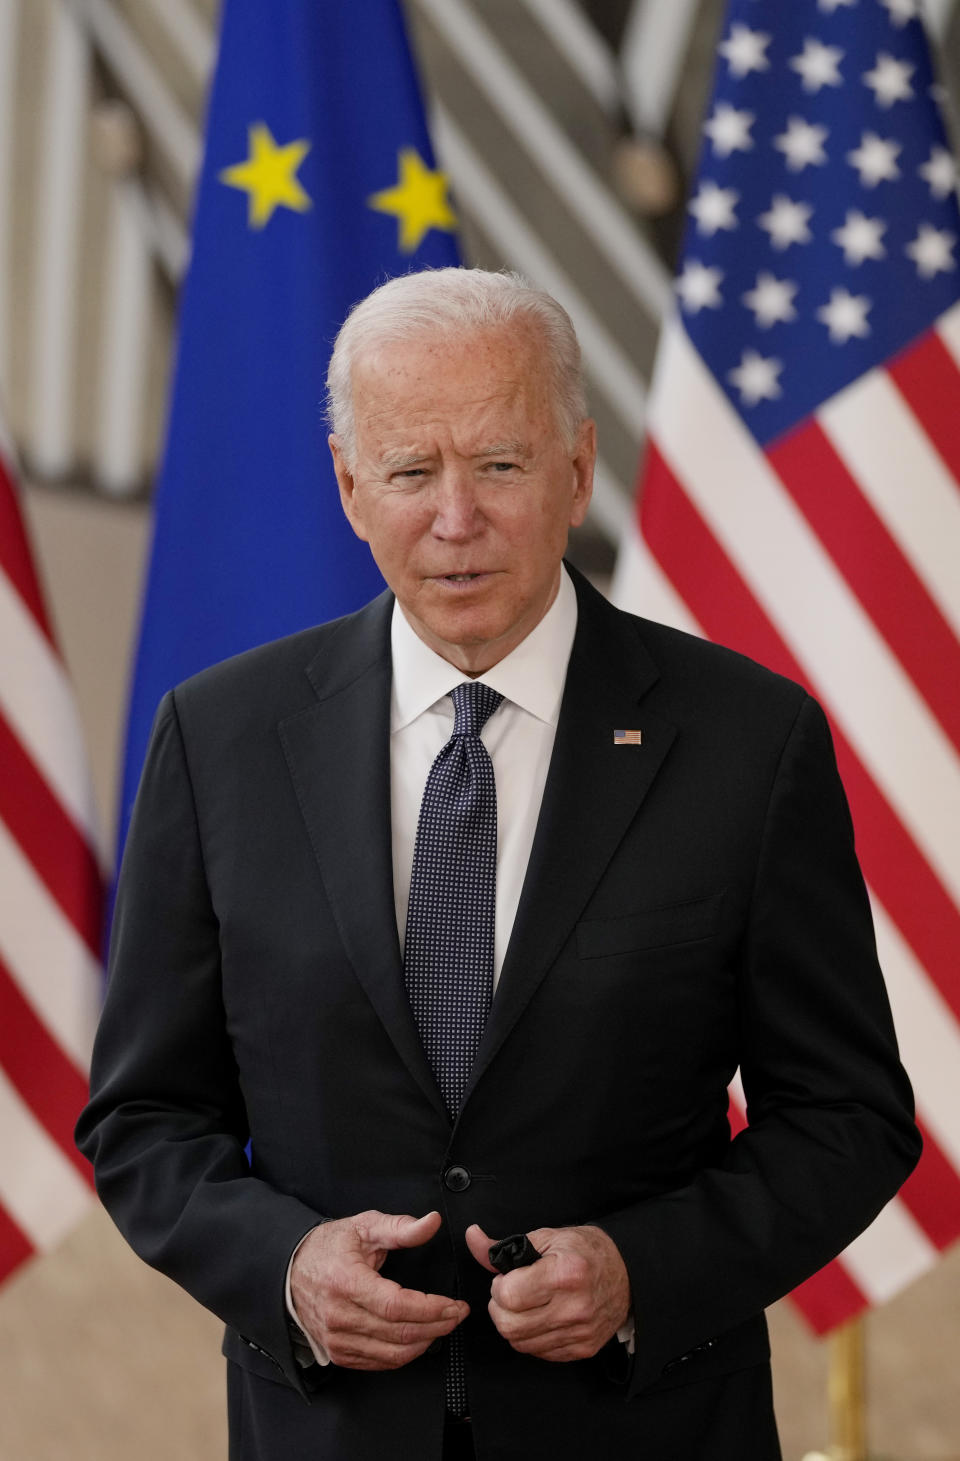 U.S. President Joe Biden speaks with the media as he arrives for the EU-US summit at the European Council building in Brussels, Tuesday, June 15, 2021. (AP Photo/Francisco Seco)